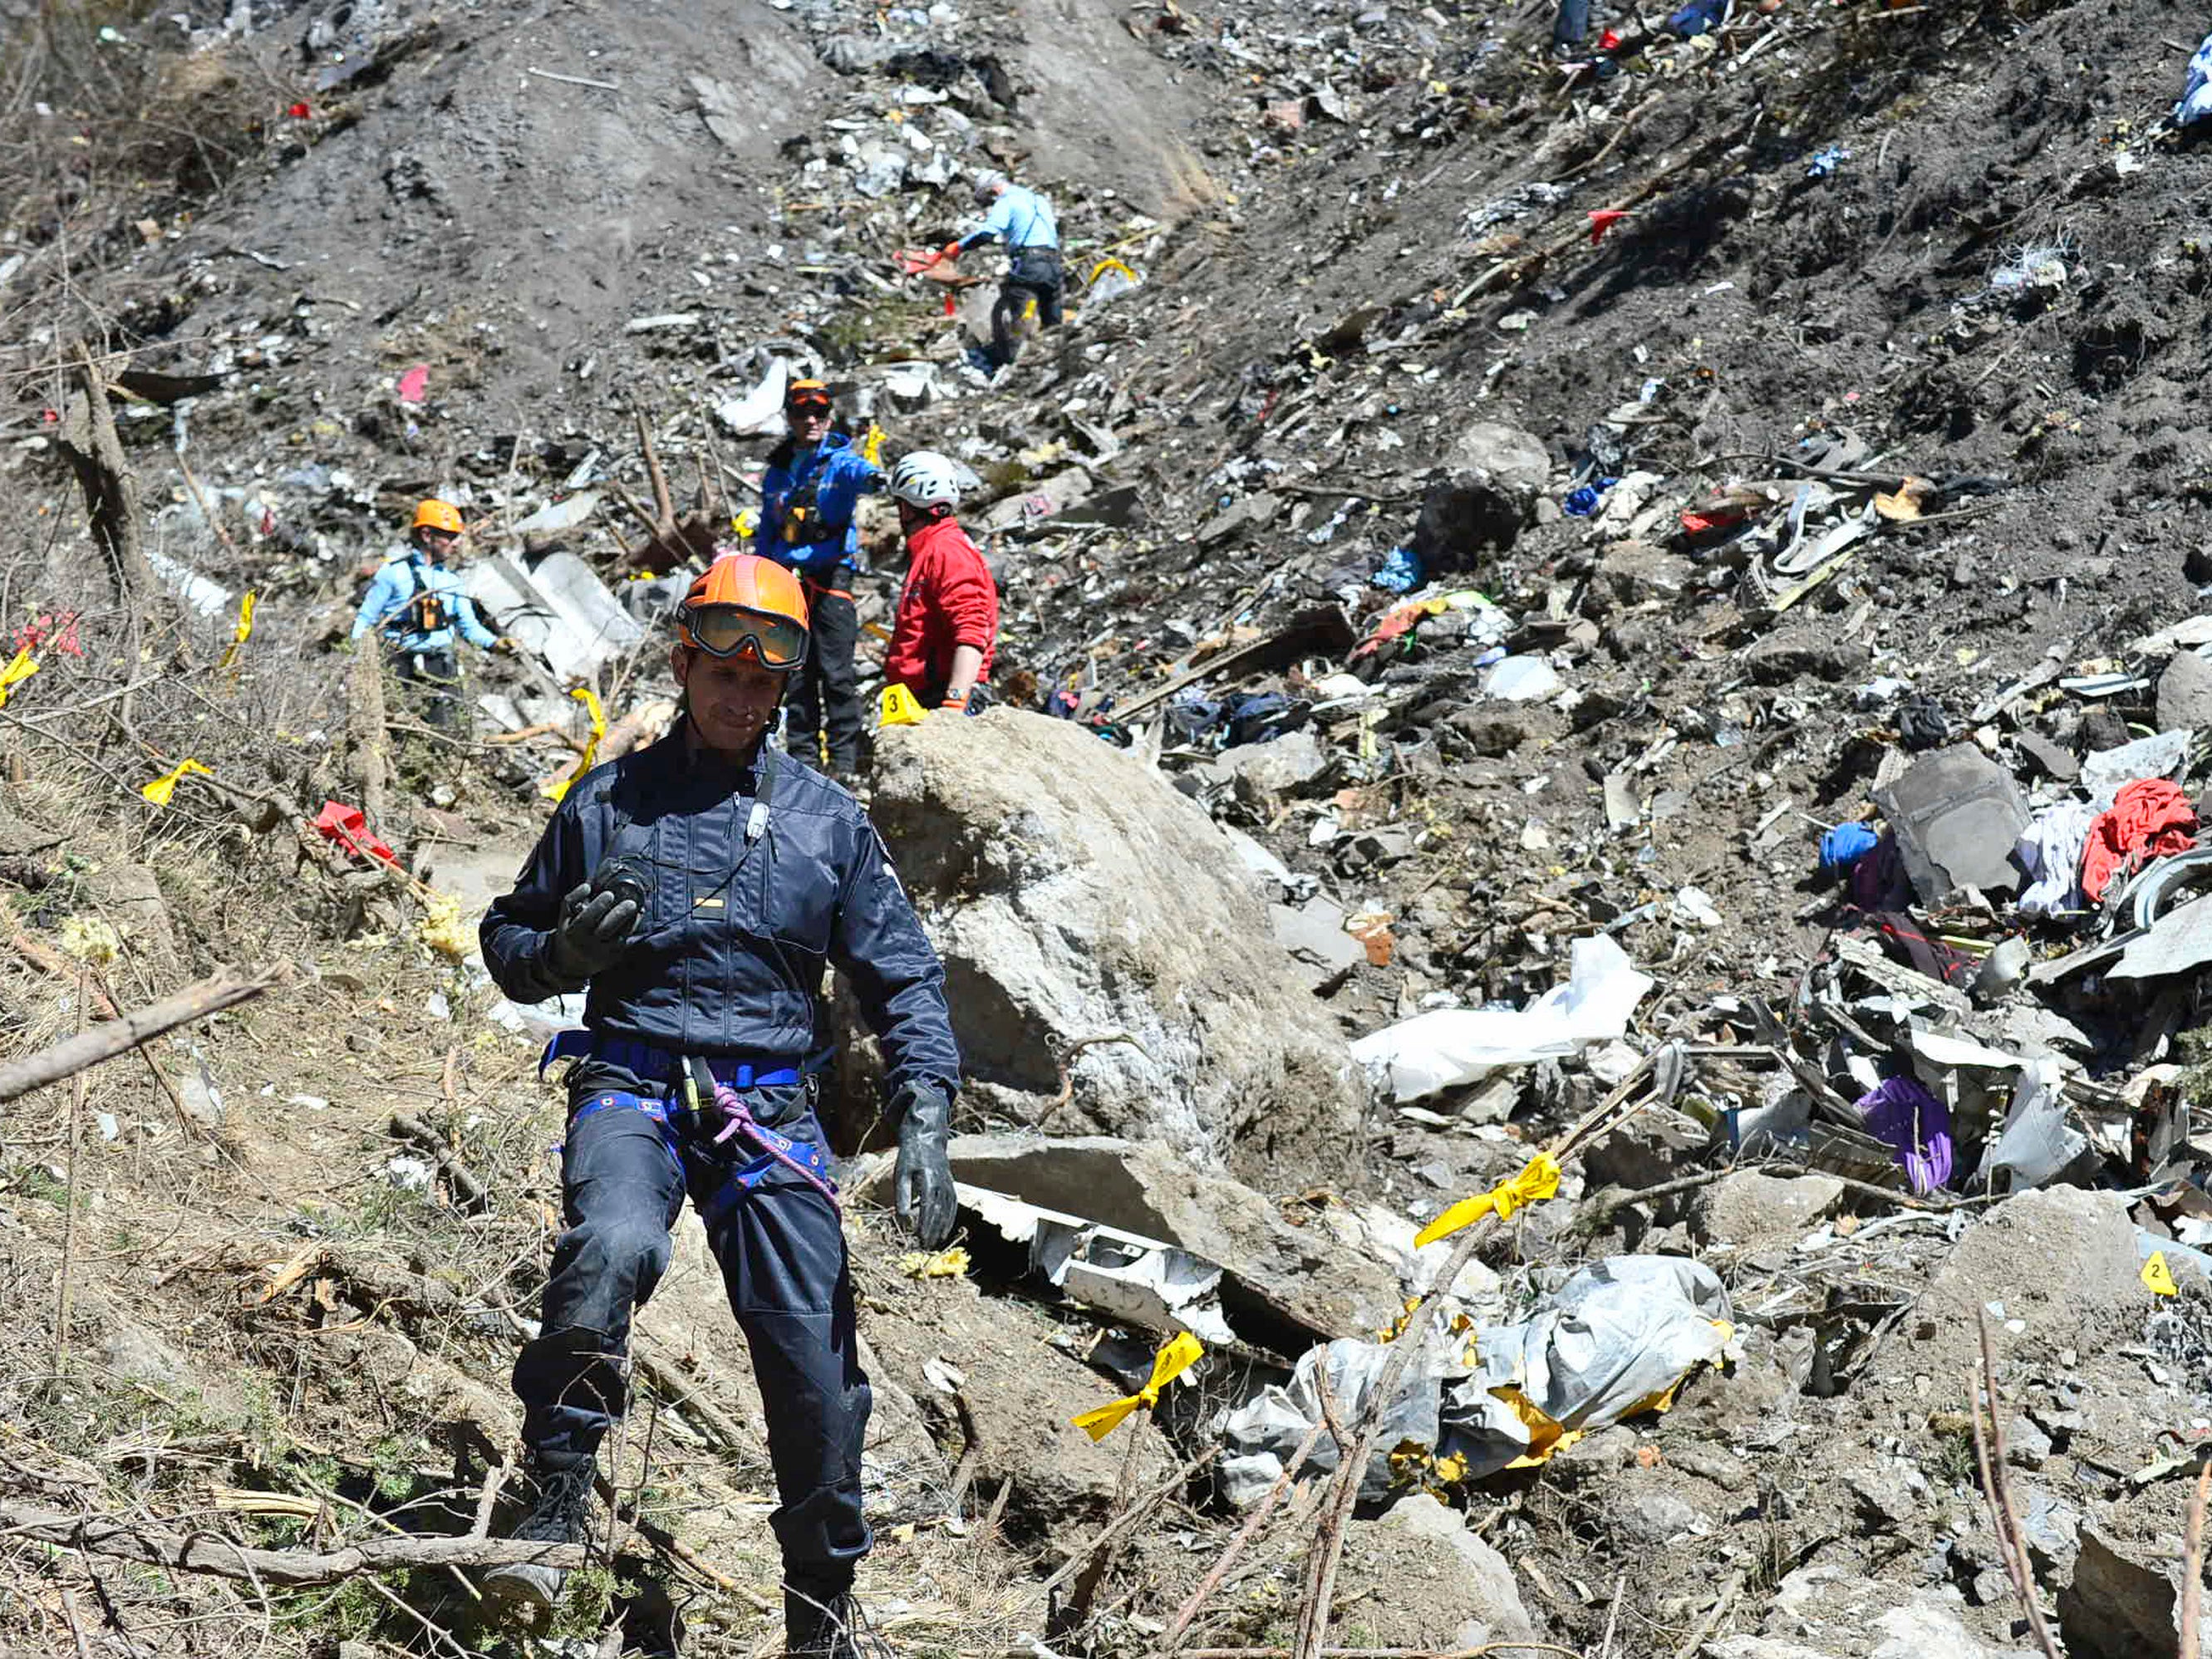 Rescue workers and gendarmerie continue their search operation near the site of the Germanwings plane crash near the French Alps